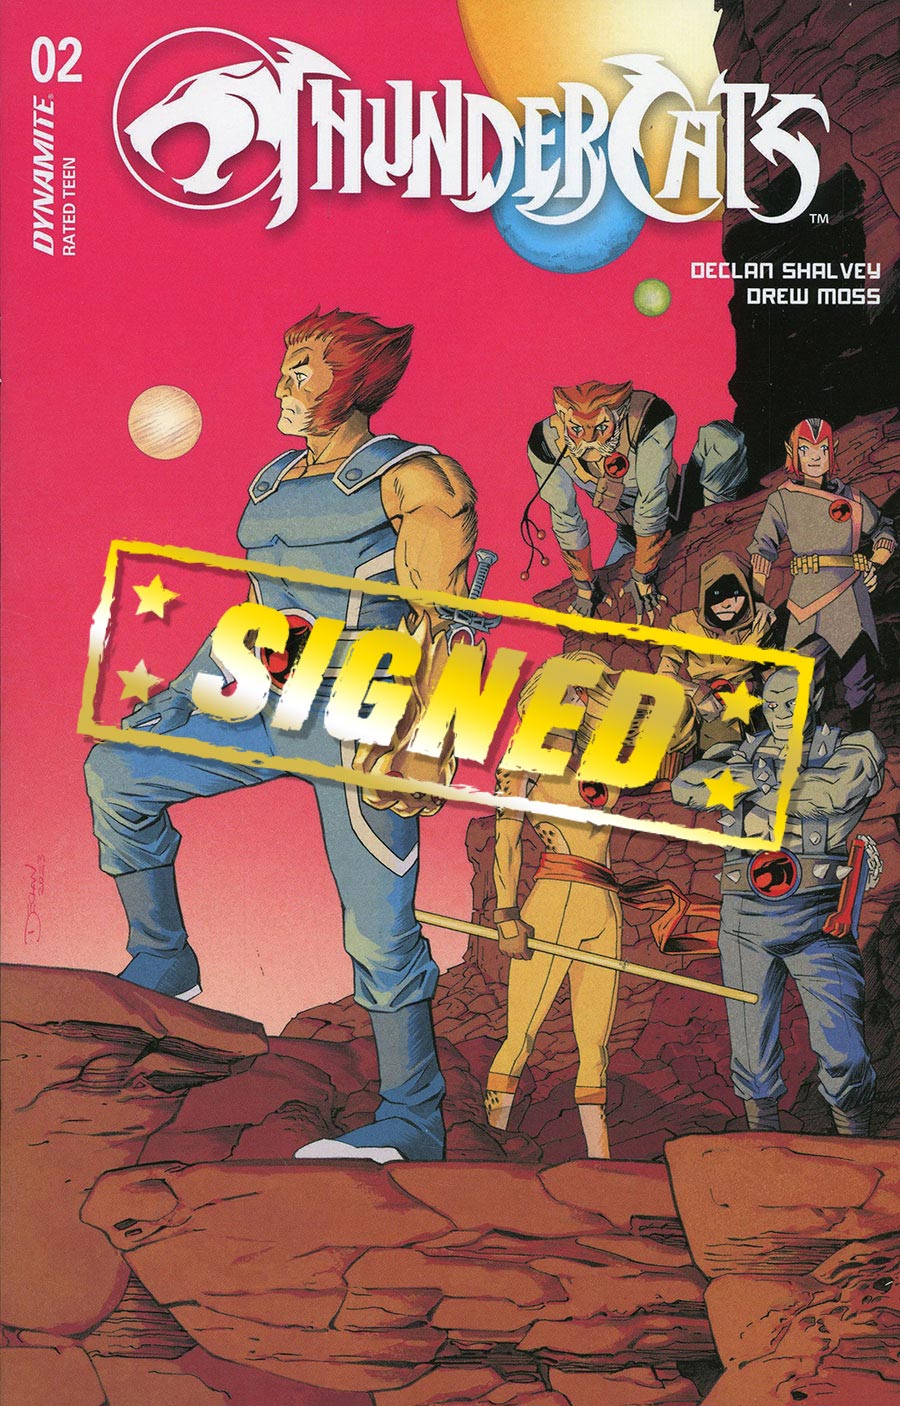 Thundercats Vol 3 #2 Cover Z-L Variant Declan Shalvey Cover Signed By Declan Shalvey